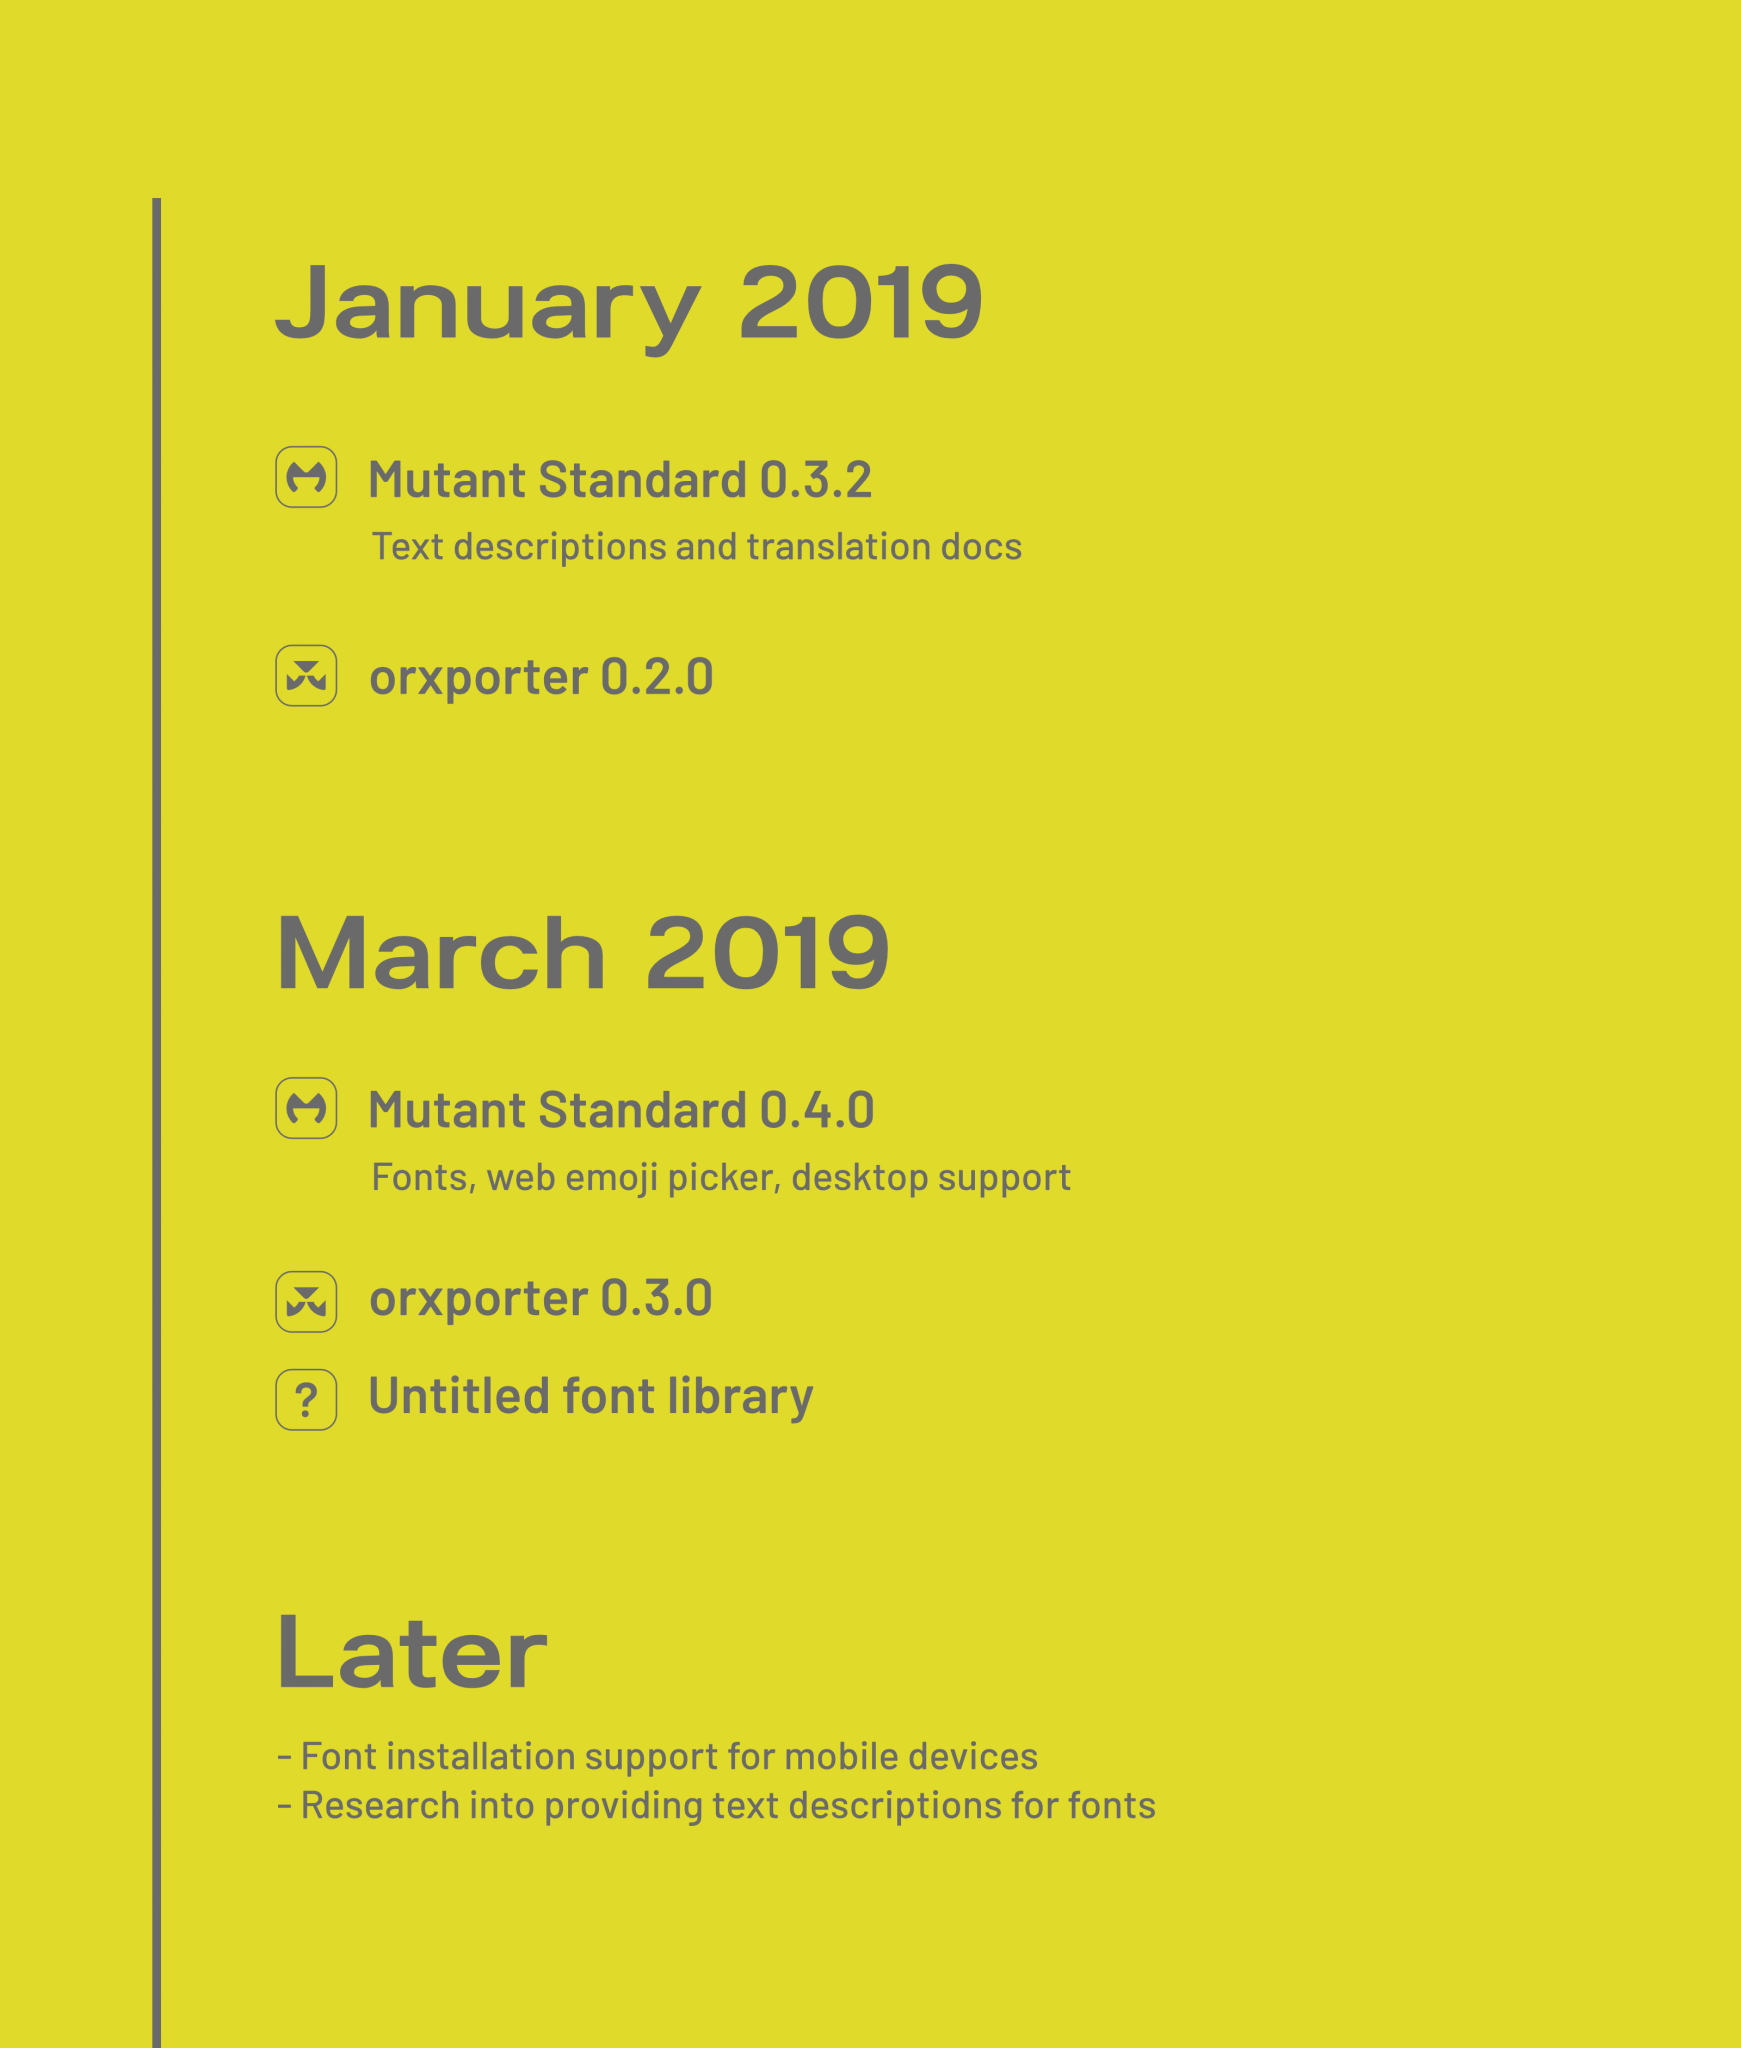 A dark gray vertical timeline on an acid yellow background. January 2019: Mutant Standard 0.3.2 (Text descriptions and translation docs), Orxporter 0.2.0. March 2019: Mutant Standard 0.4.0 (fonts, web emoji picker, desktop support), Orxporter 0.3.0, Untitled font library. Later: Font installation for mobile devices, research into providing text descriptions for fonts.